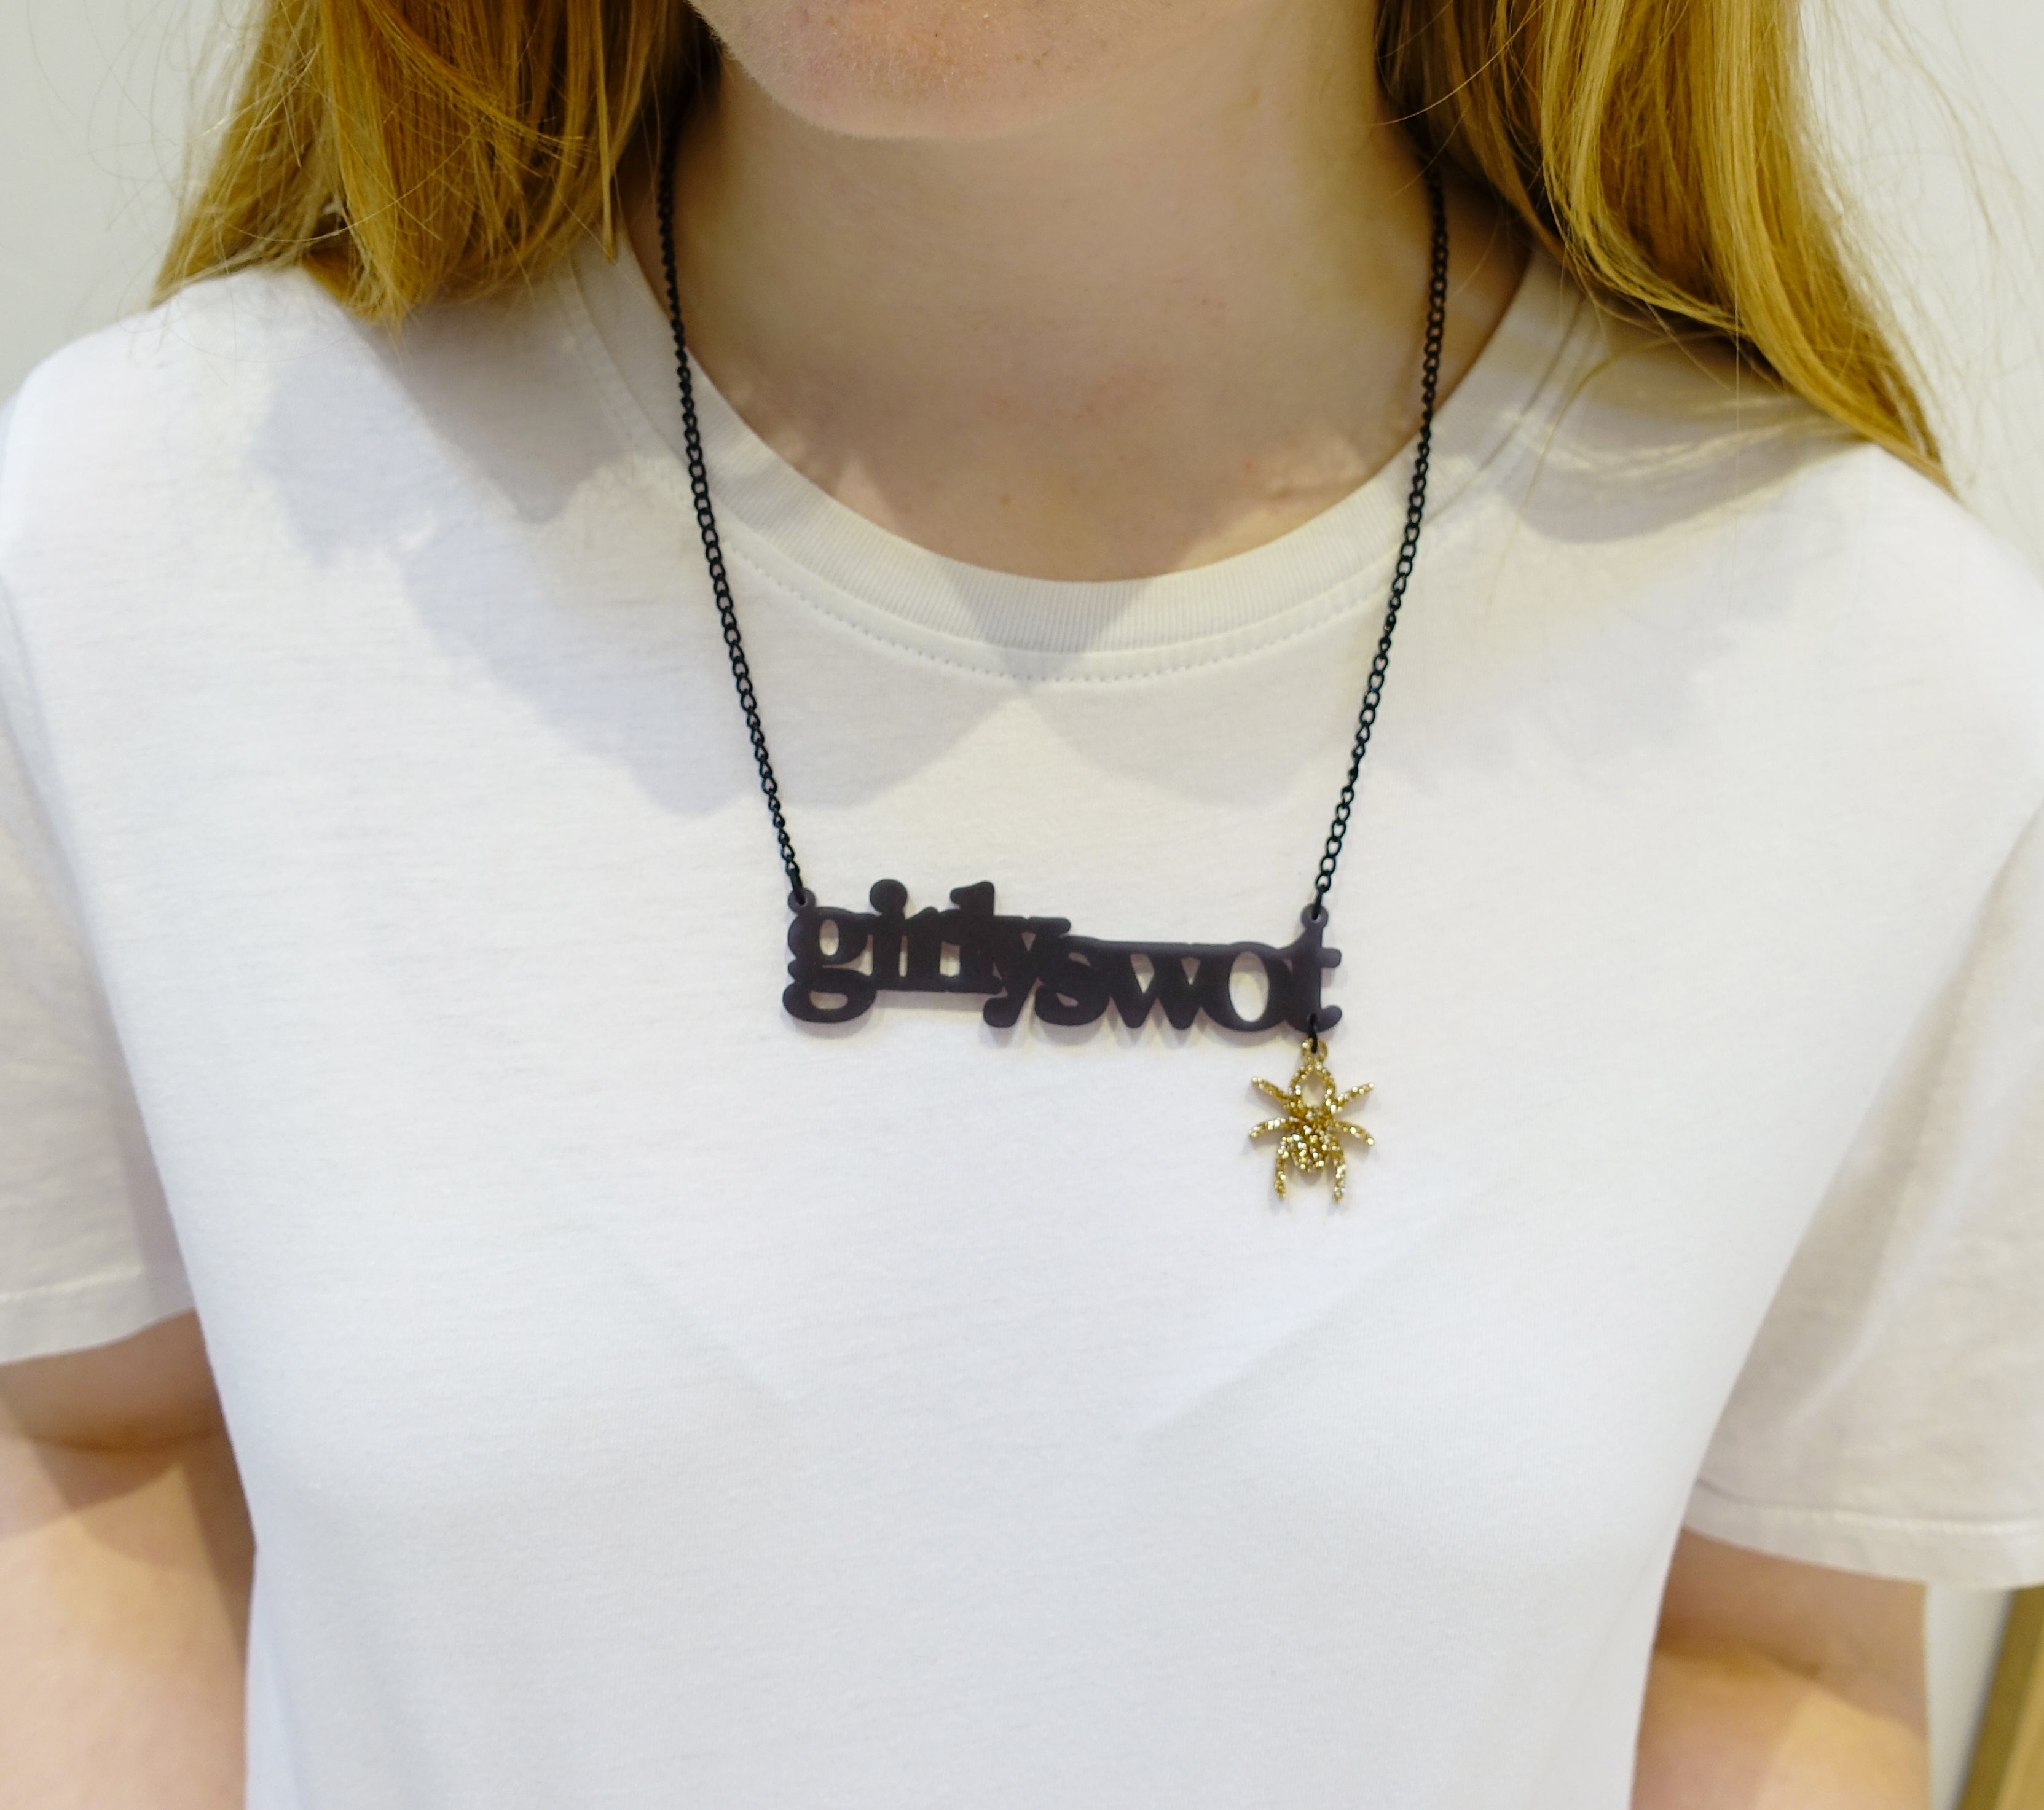 Eliza wears slate Girly Swot necklace with hanging Lady Hale spider. 